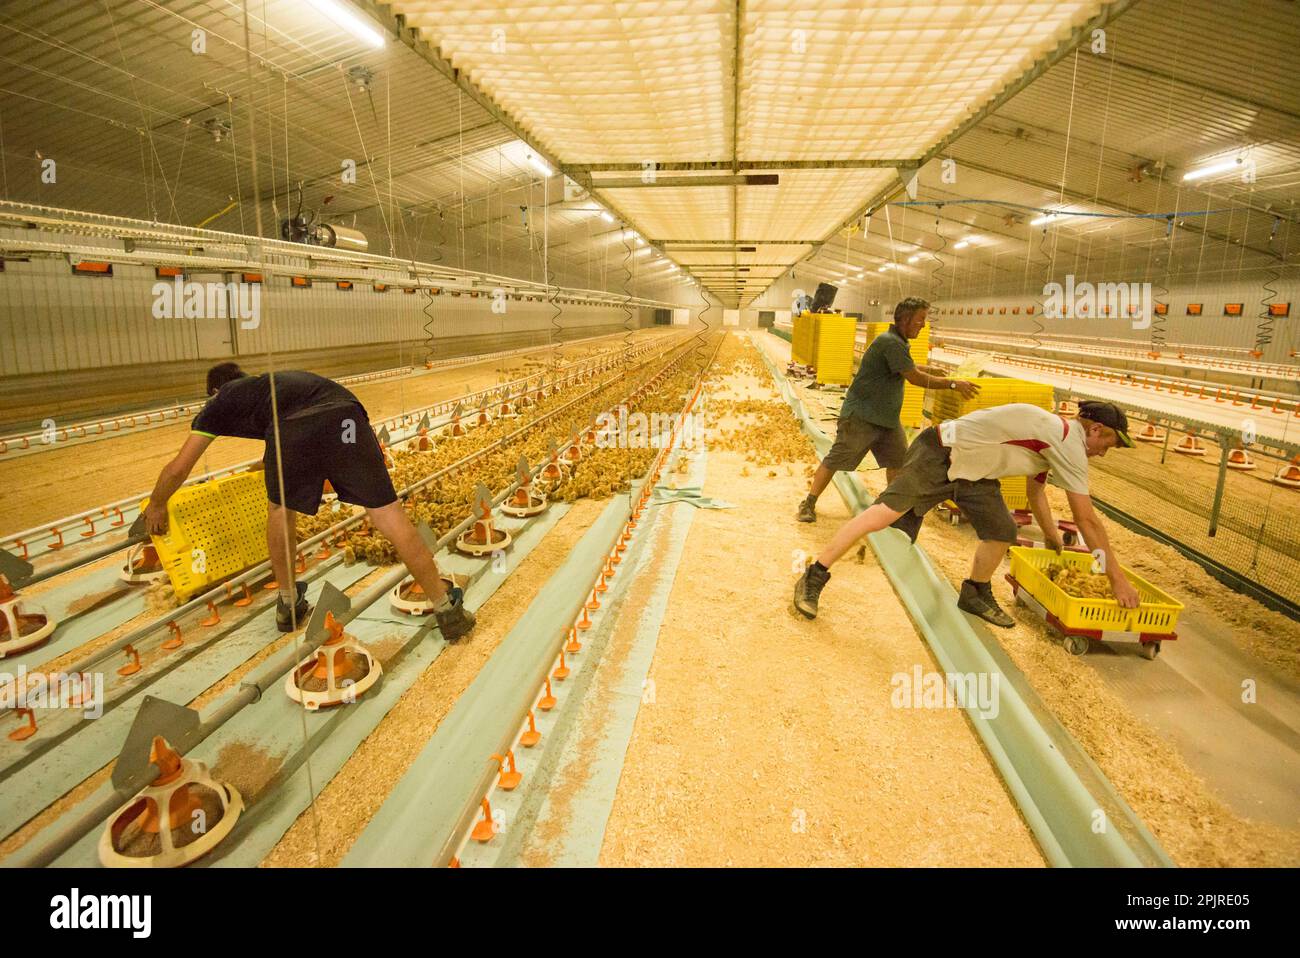 Chicken farming, workers putting layer chicks into rearing building, Preston, Lancashire, England, United Kingdom Stock Photo